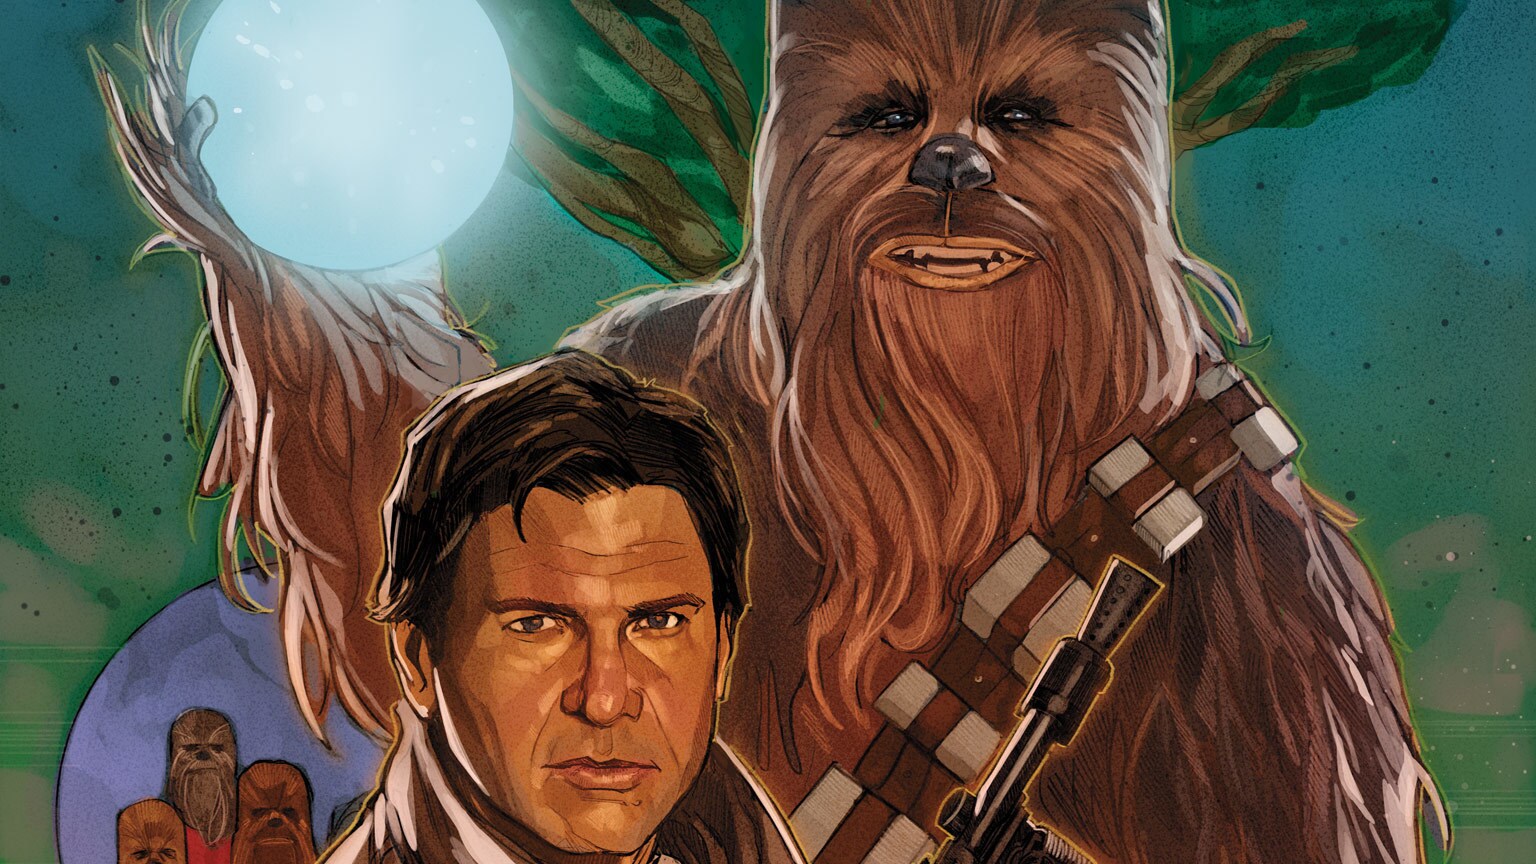 Han Solo Gets into the Holiday Spirit in Marvel's Star Wars: Life Day #1 - Exclusive Preview